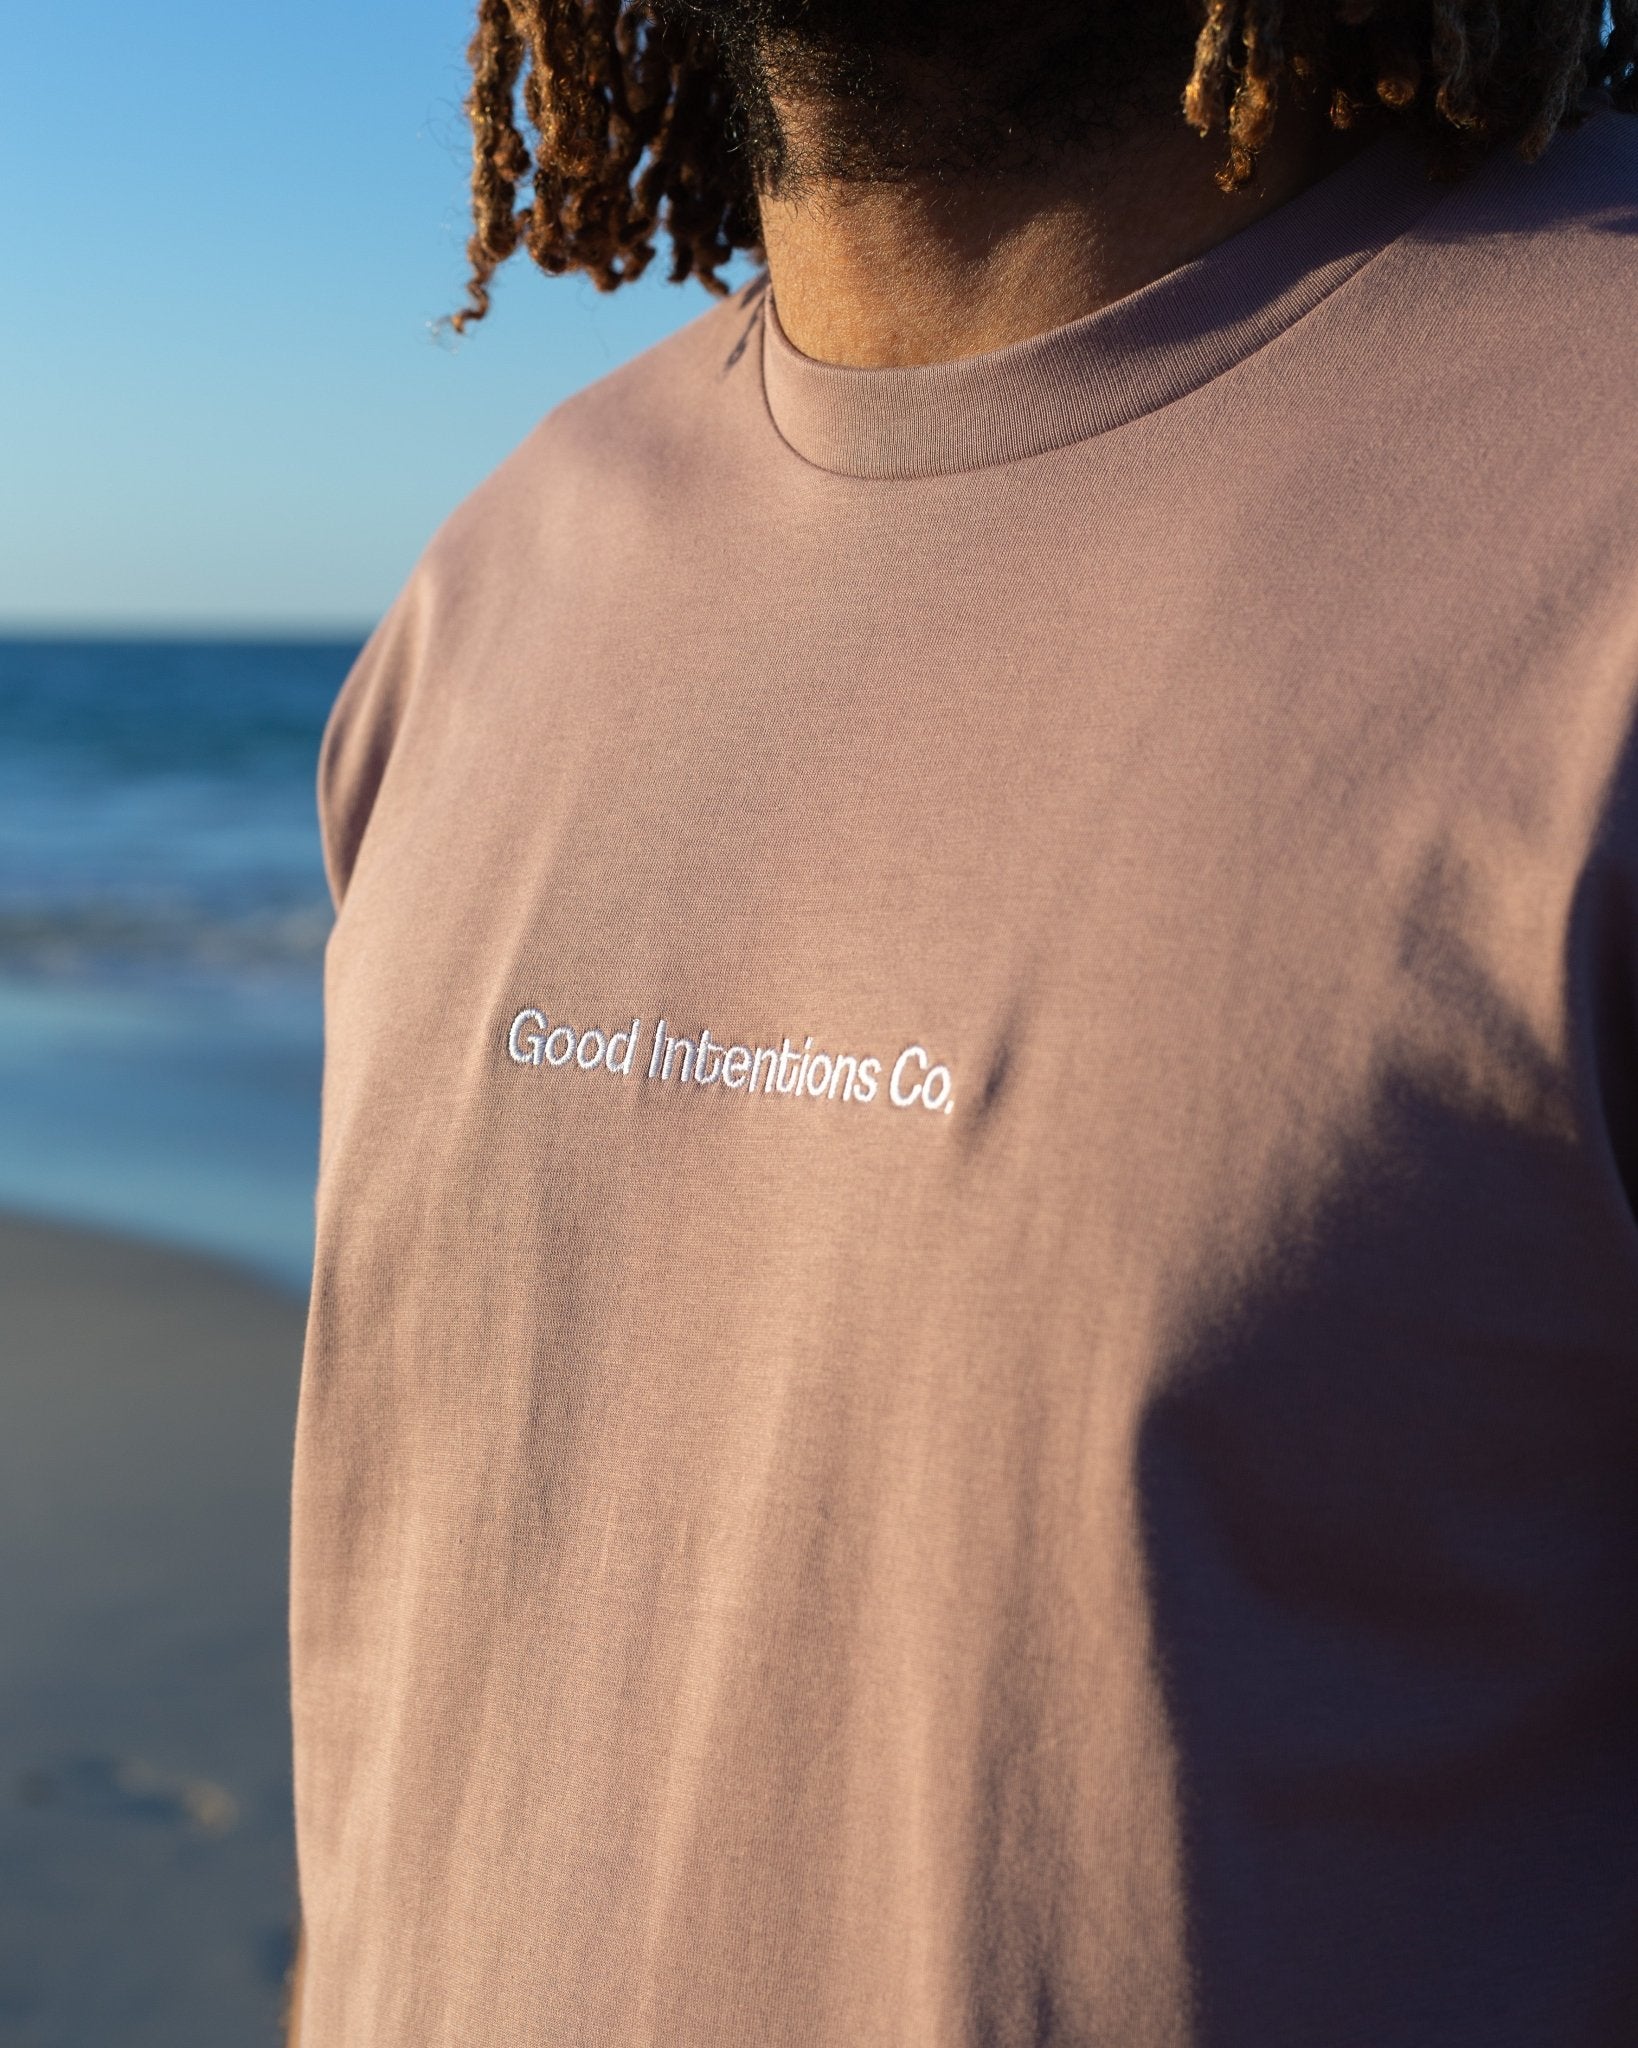 Hazy Pink Tee - Good Intentions Co.